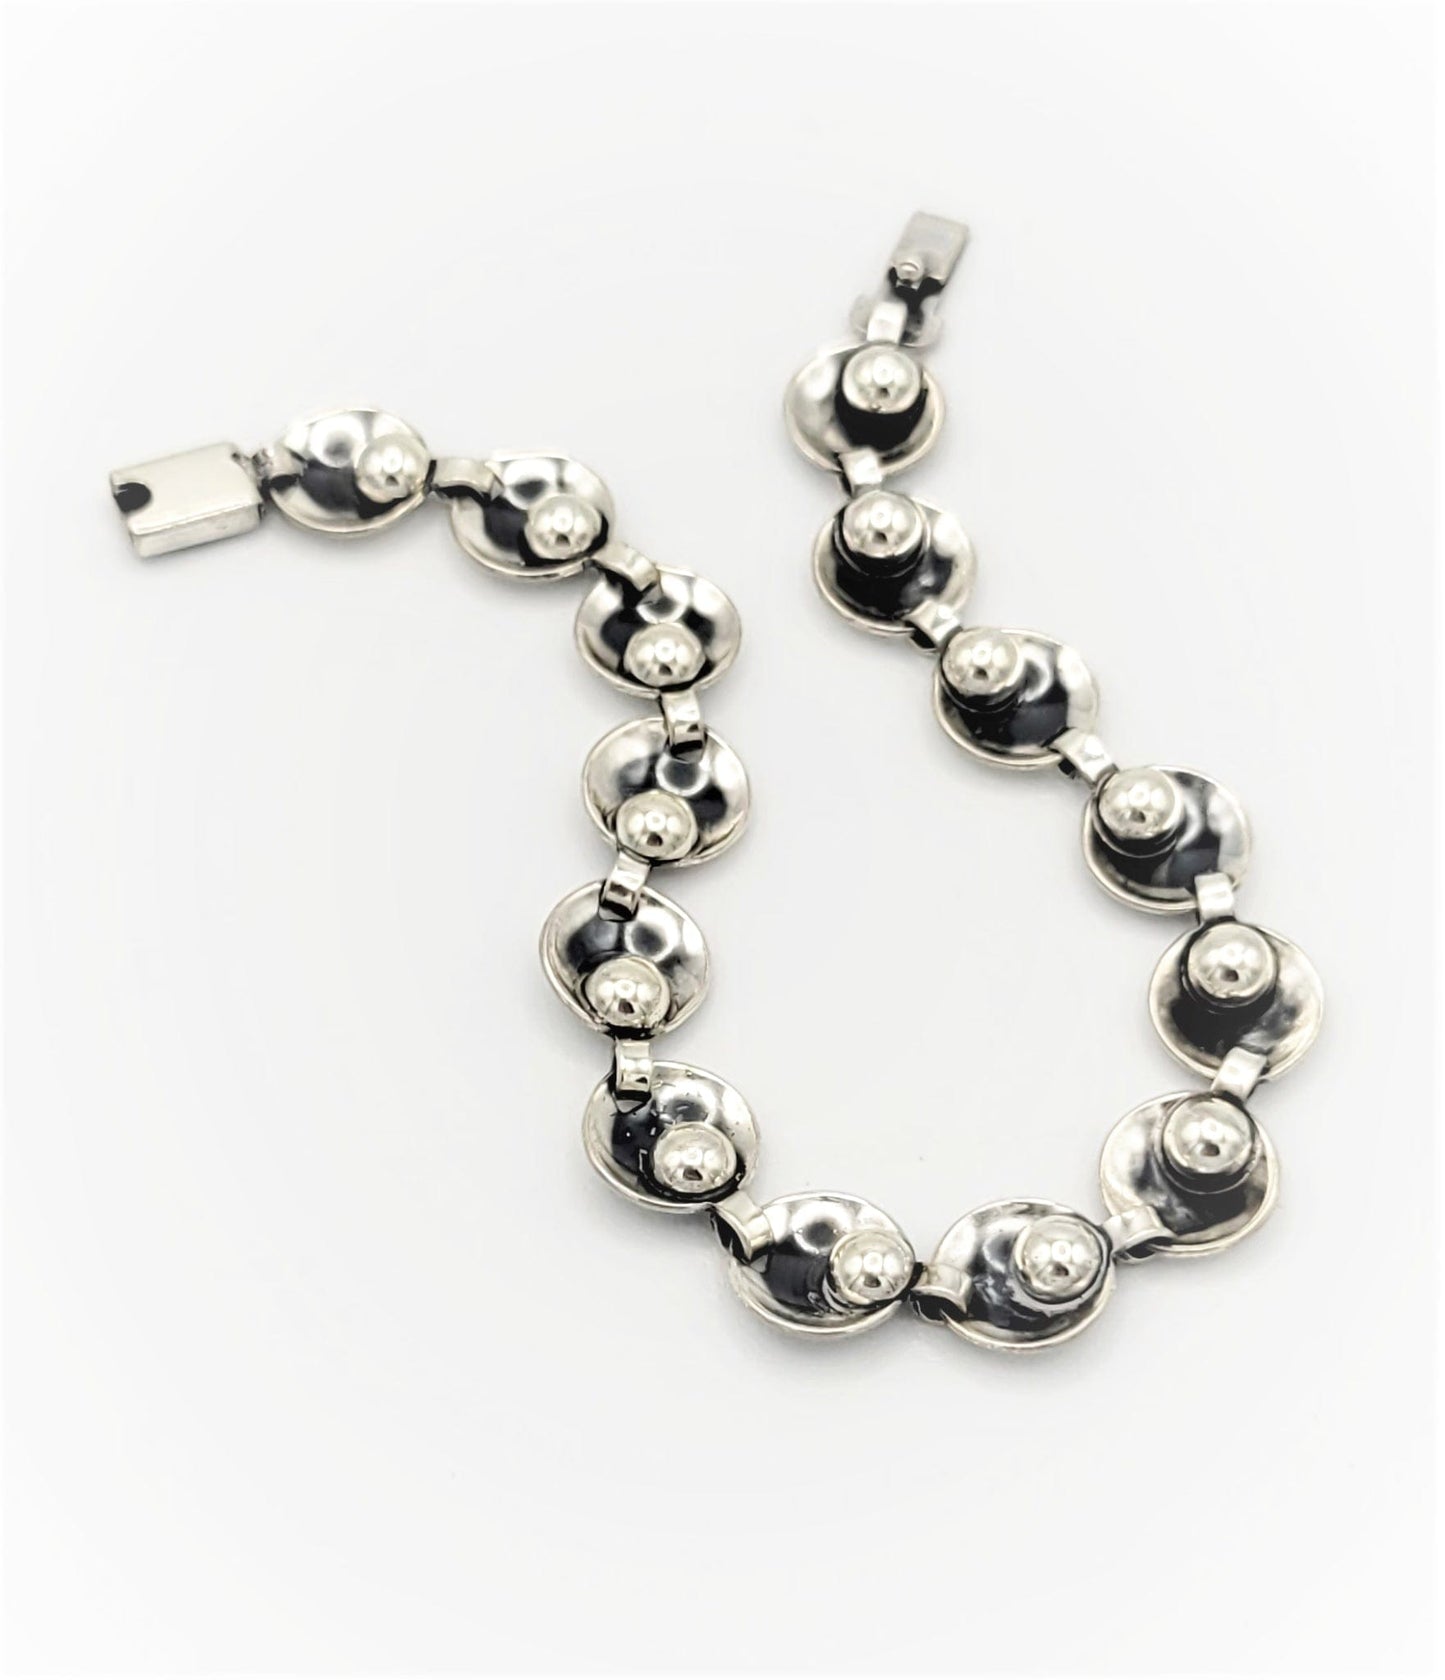 Max Standager Jewelry Danish Designer Max Standager Sterling Silver 3-D Orbs Link Bracelet Circa 1960s